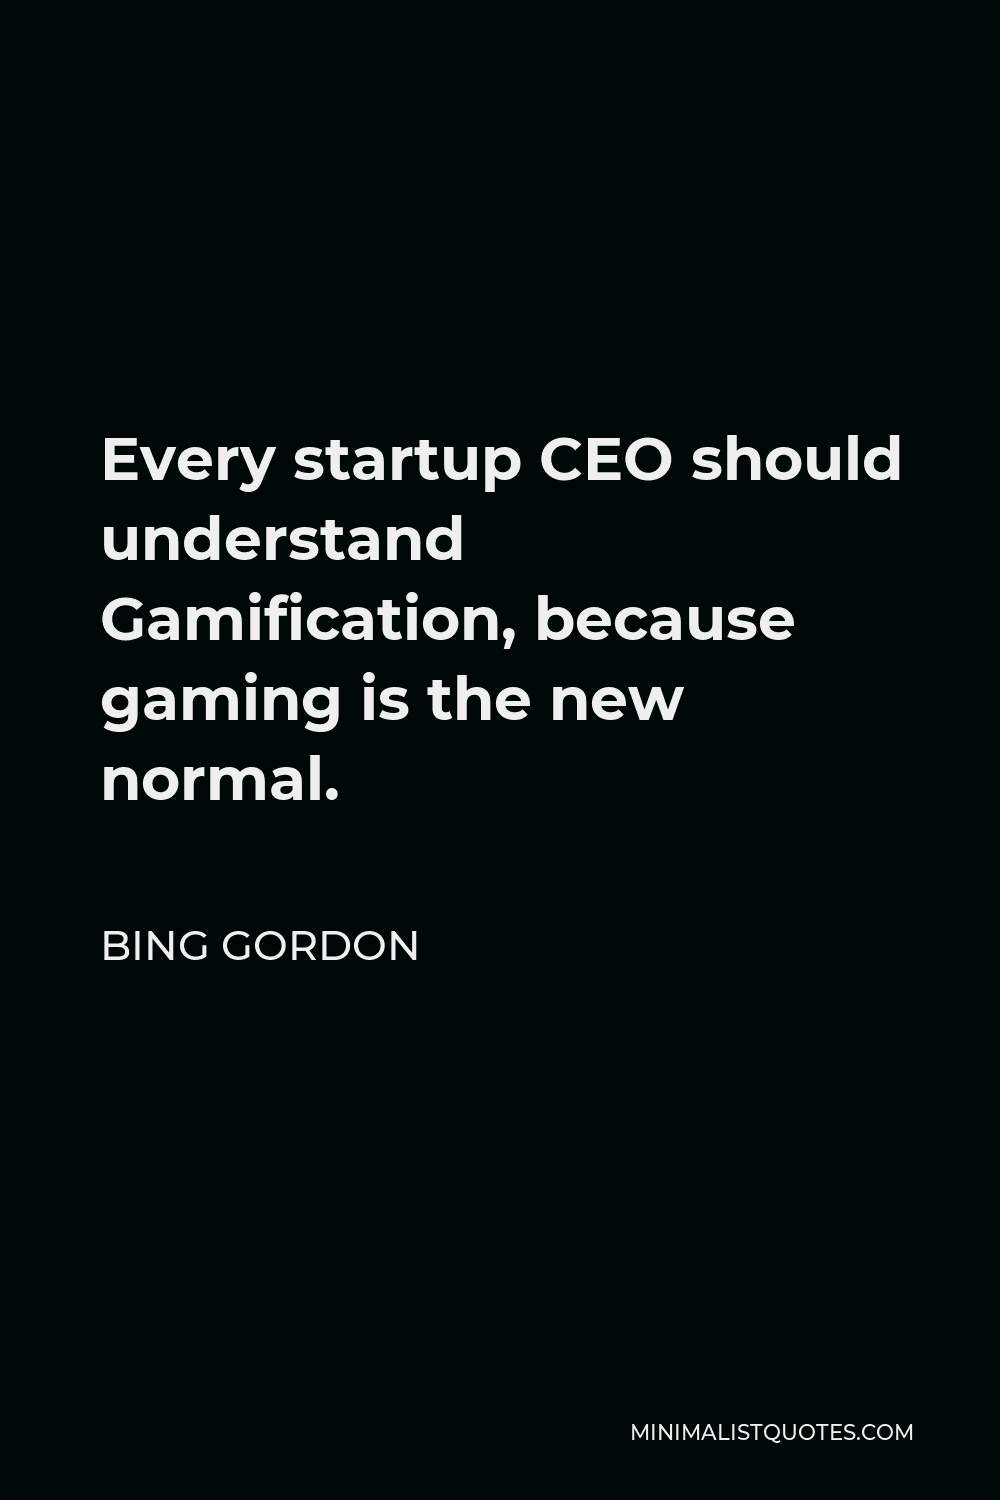 Bing Gordon Quote - Every startup CEO should understand Gamification, because gaming is the new normal.